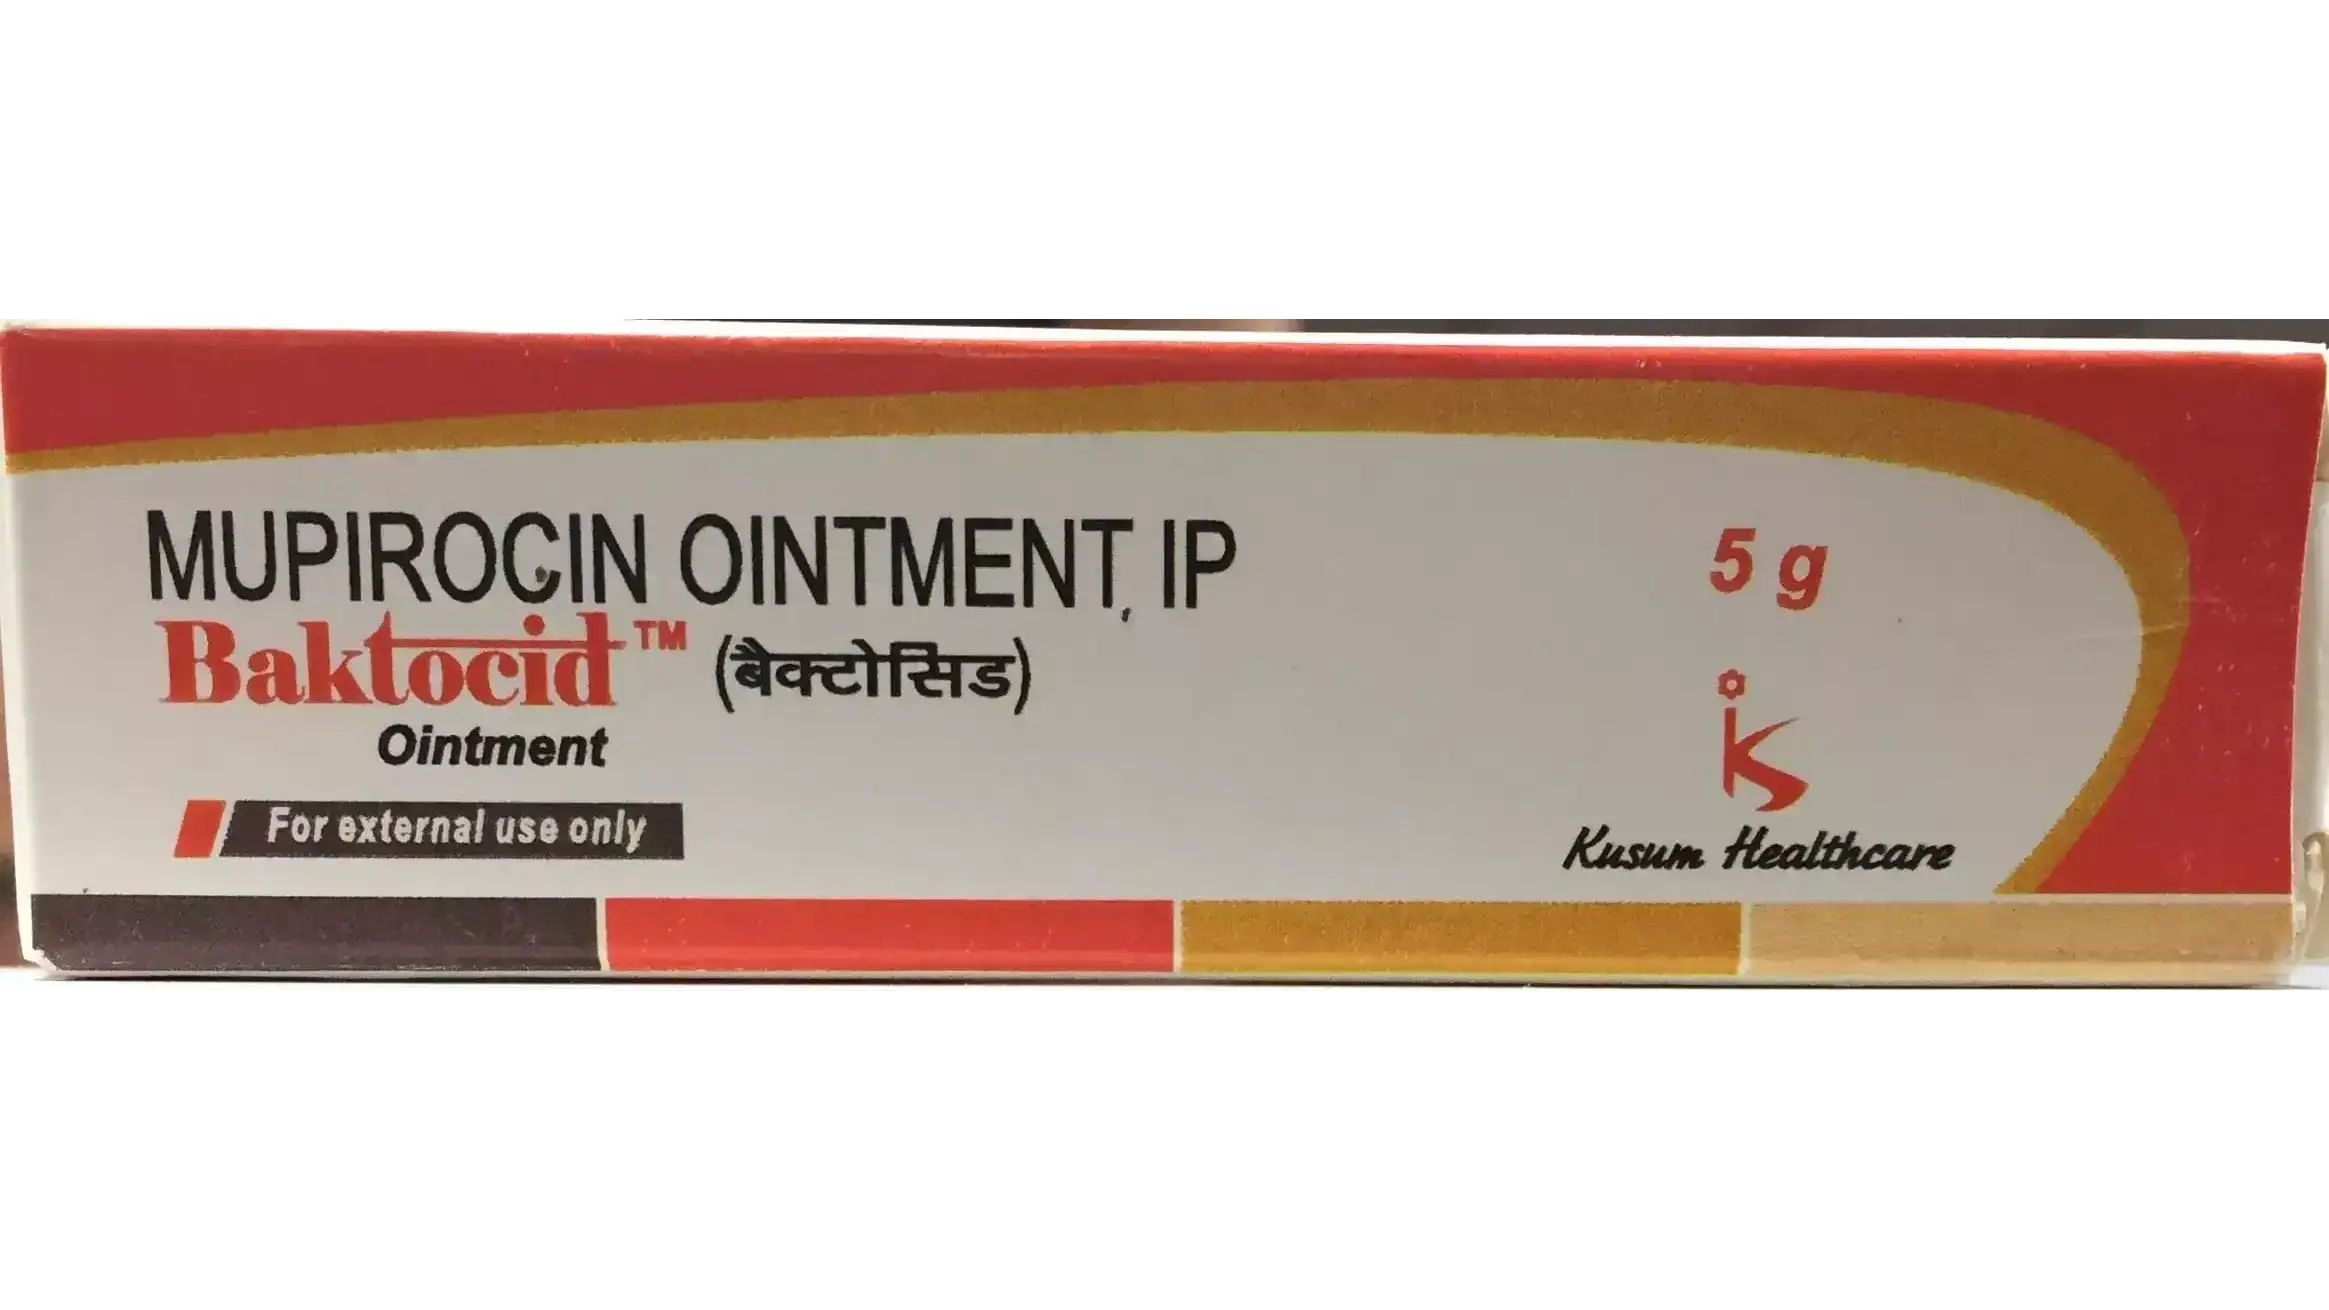 Bactocid Ointment